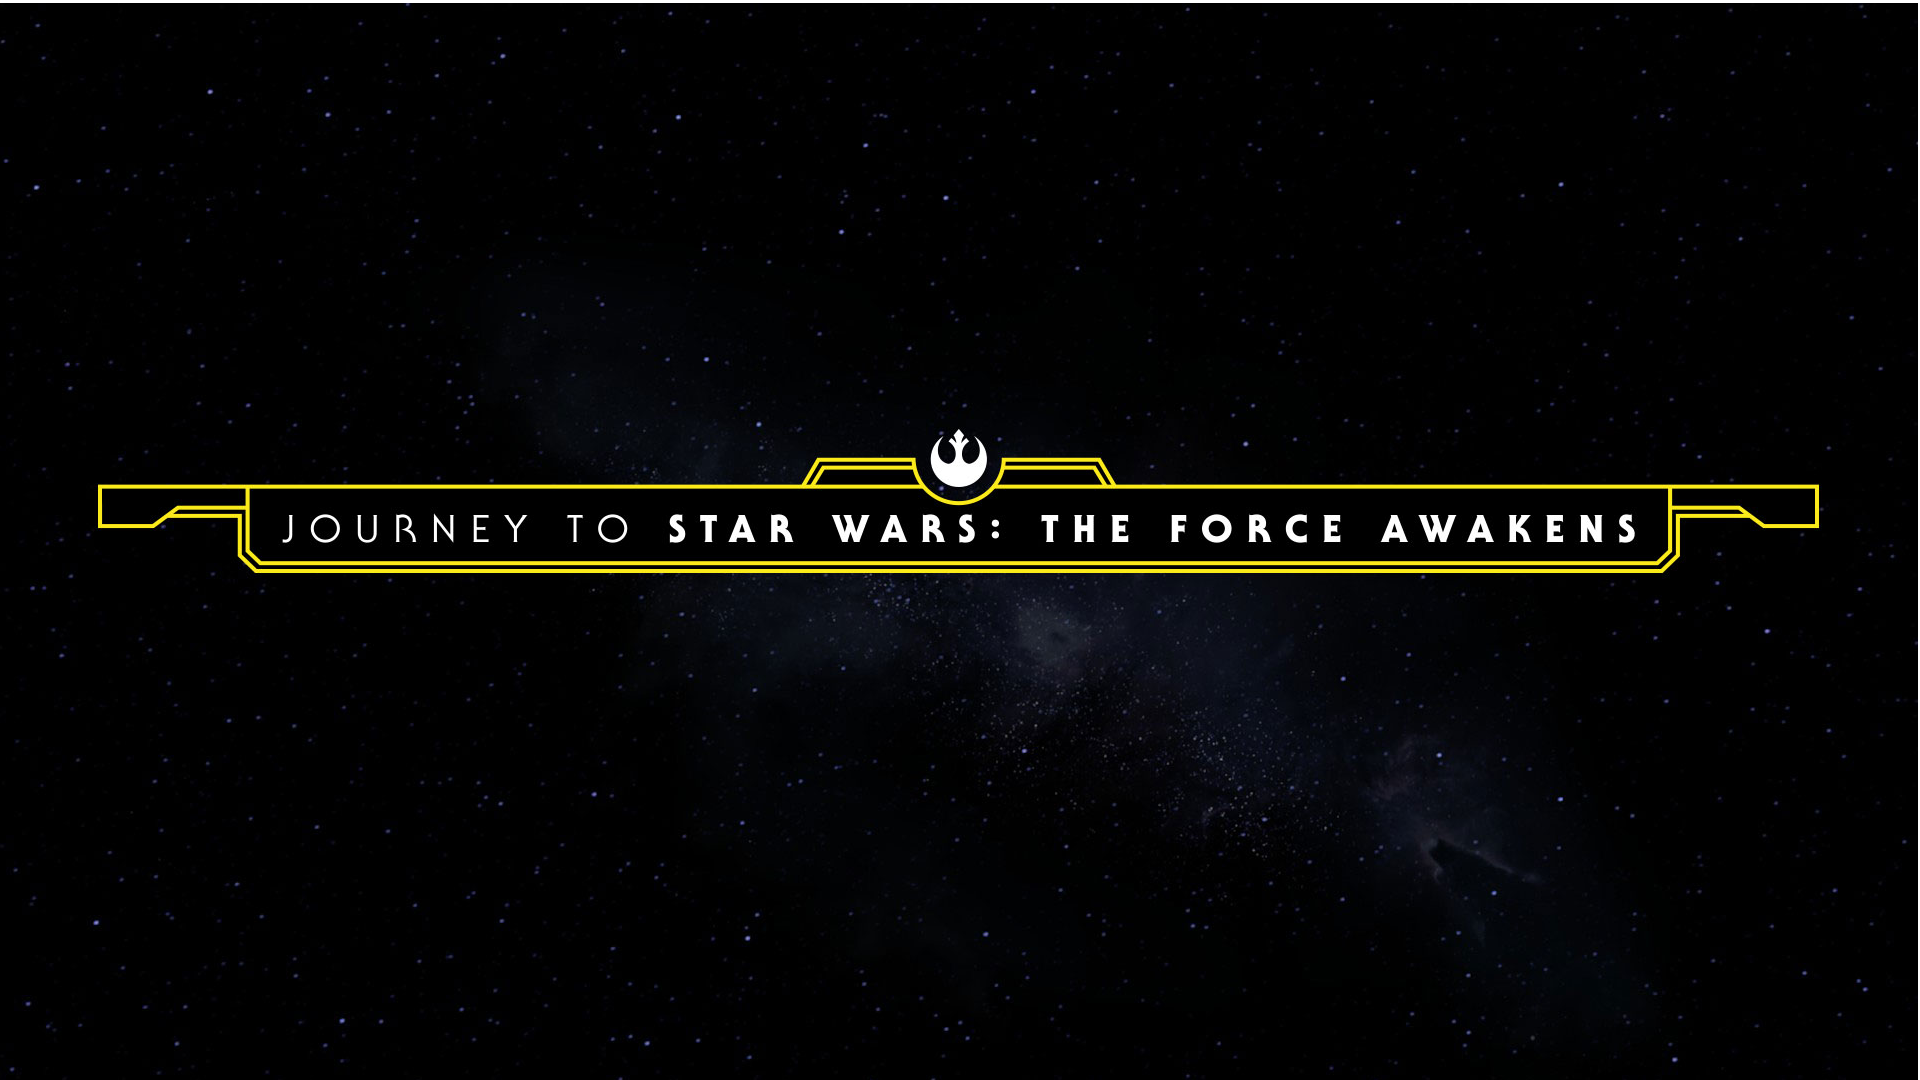 Journey to Star Wars: The Force Awakens